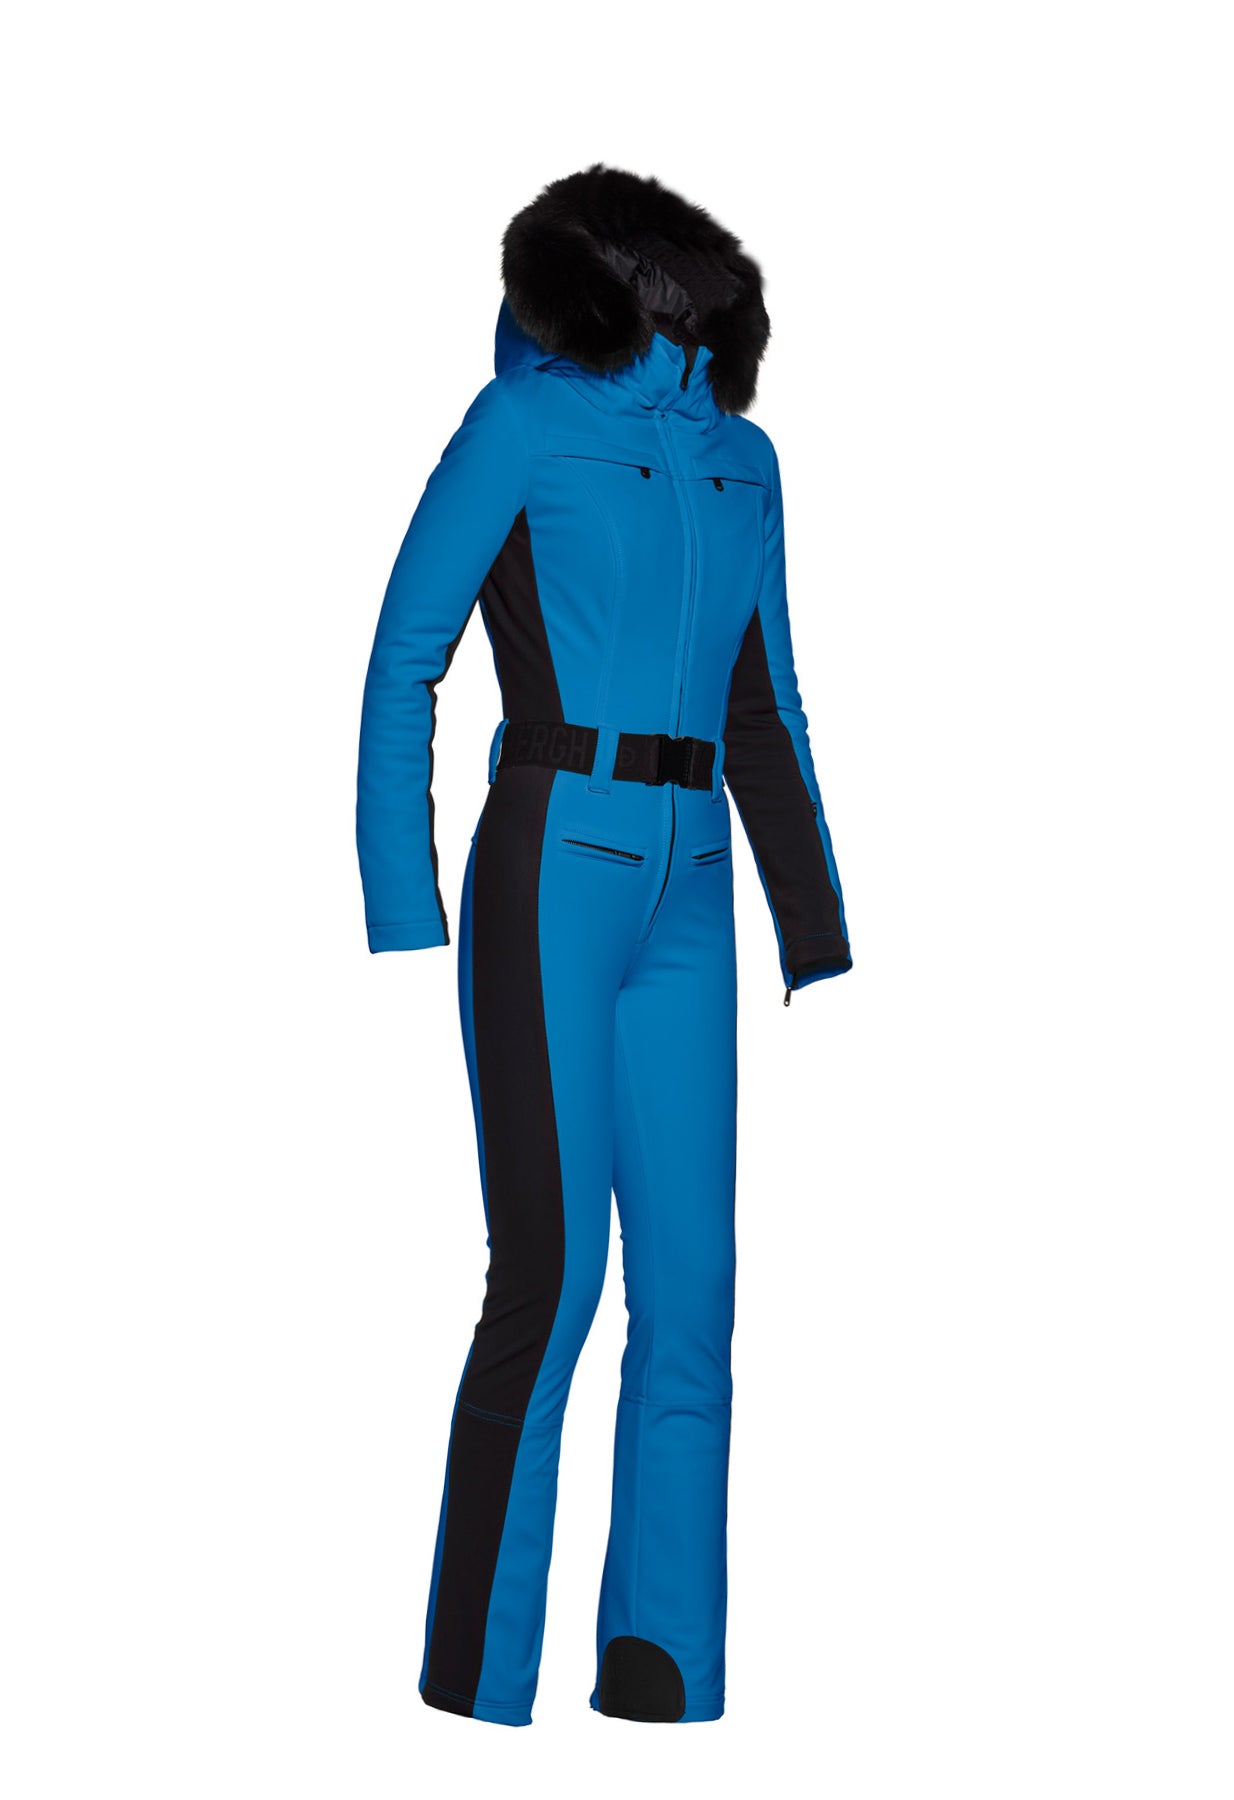 Goldbergh Parry One Piece Ski Suit in Electric Blue with Faux Fur Hood